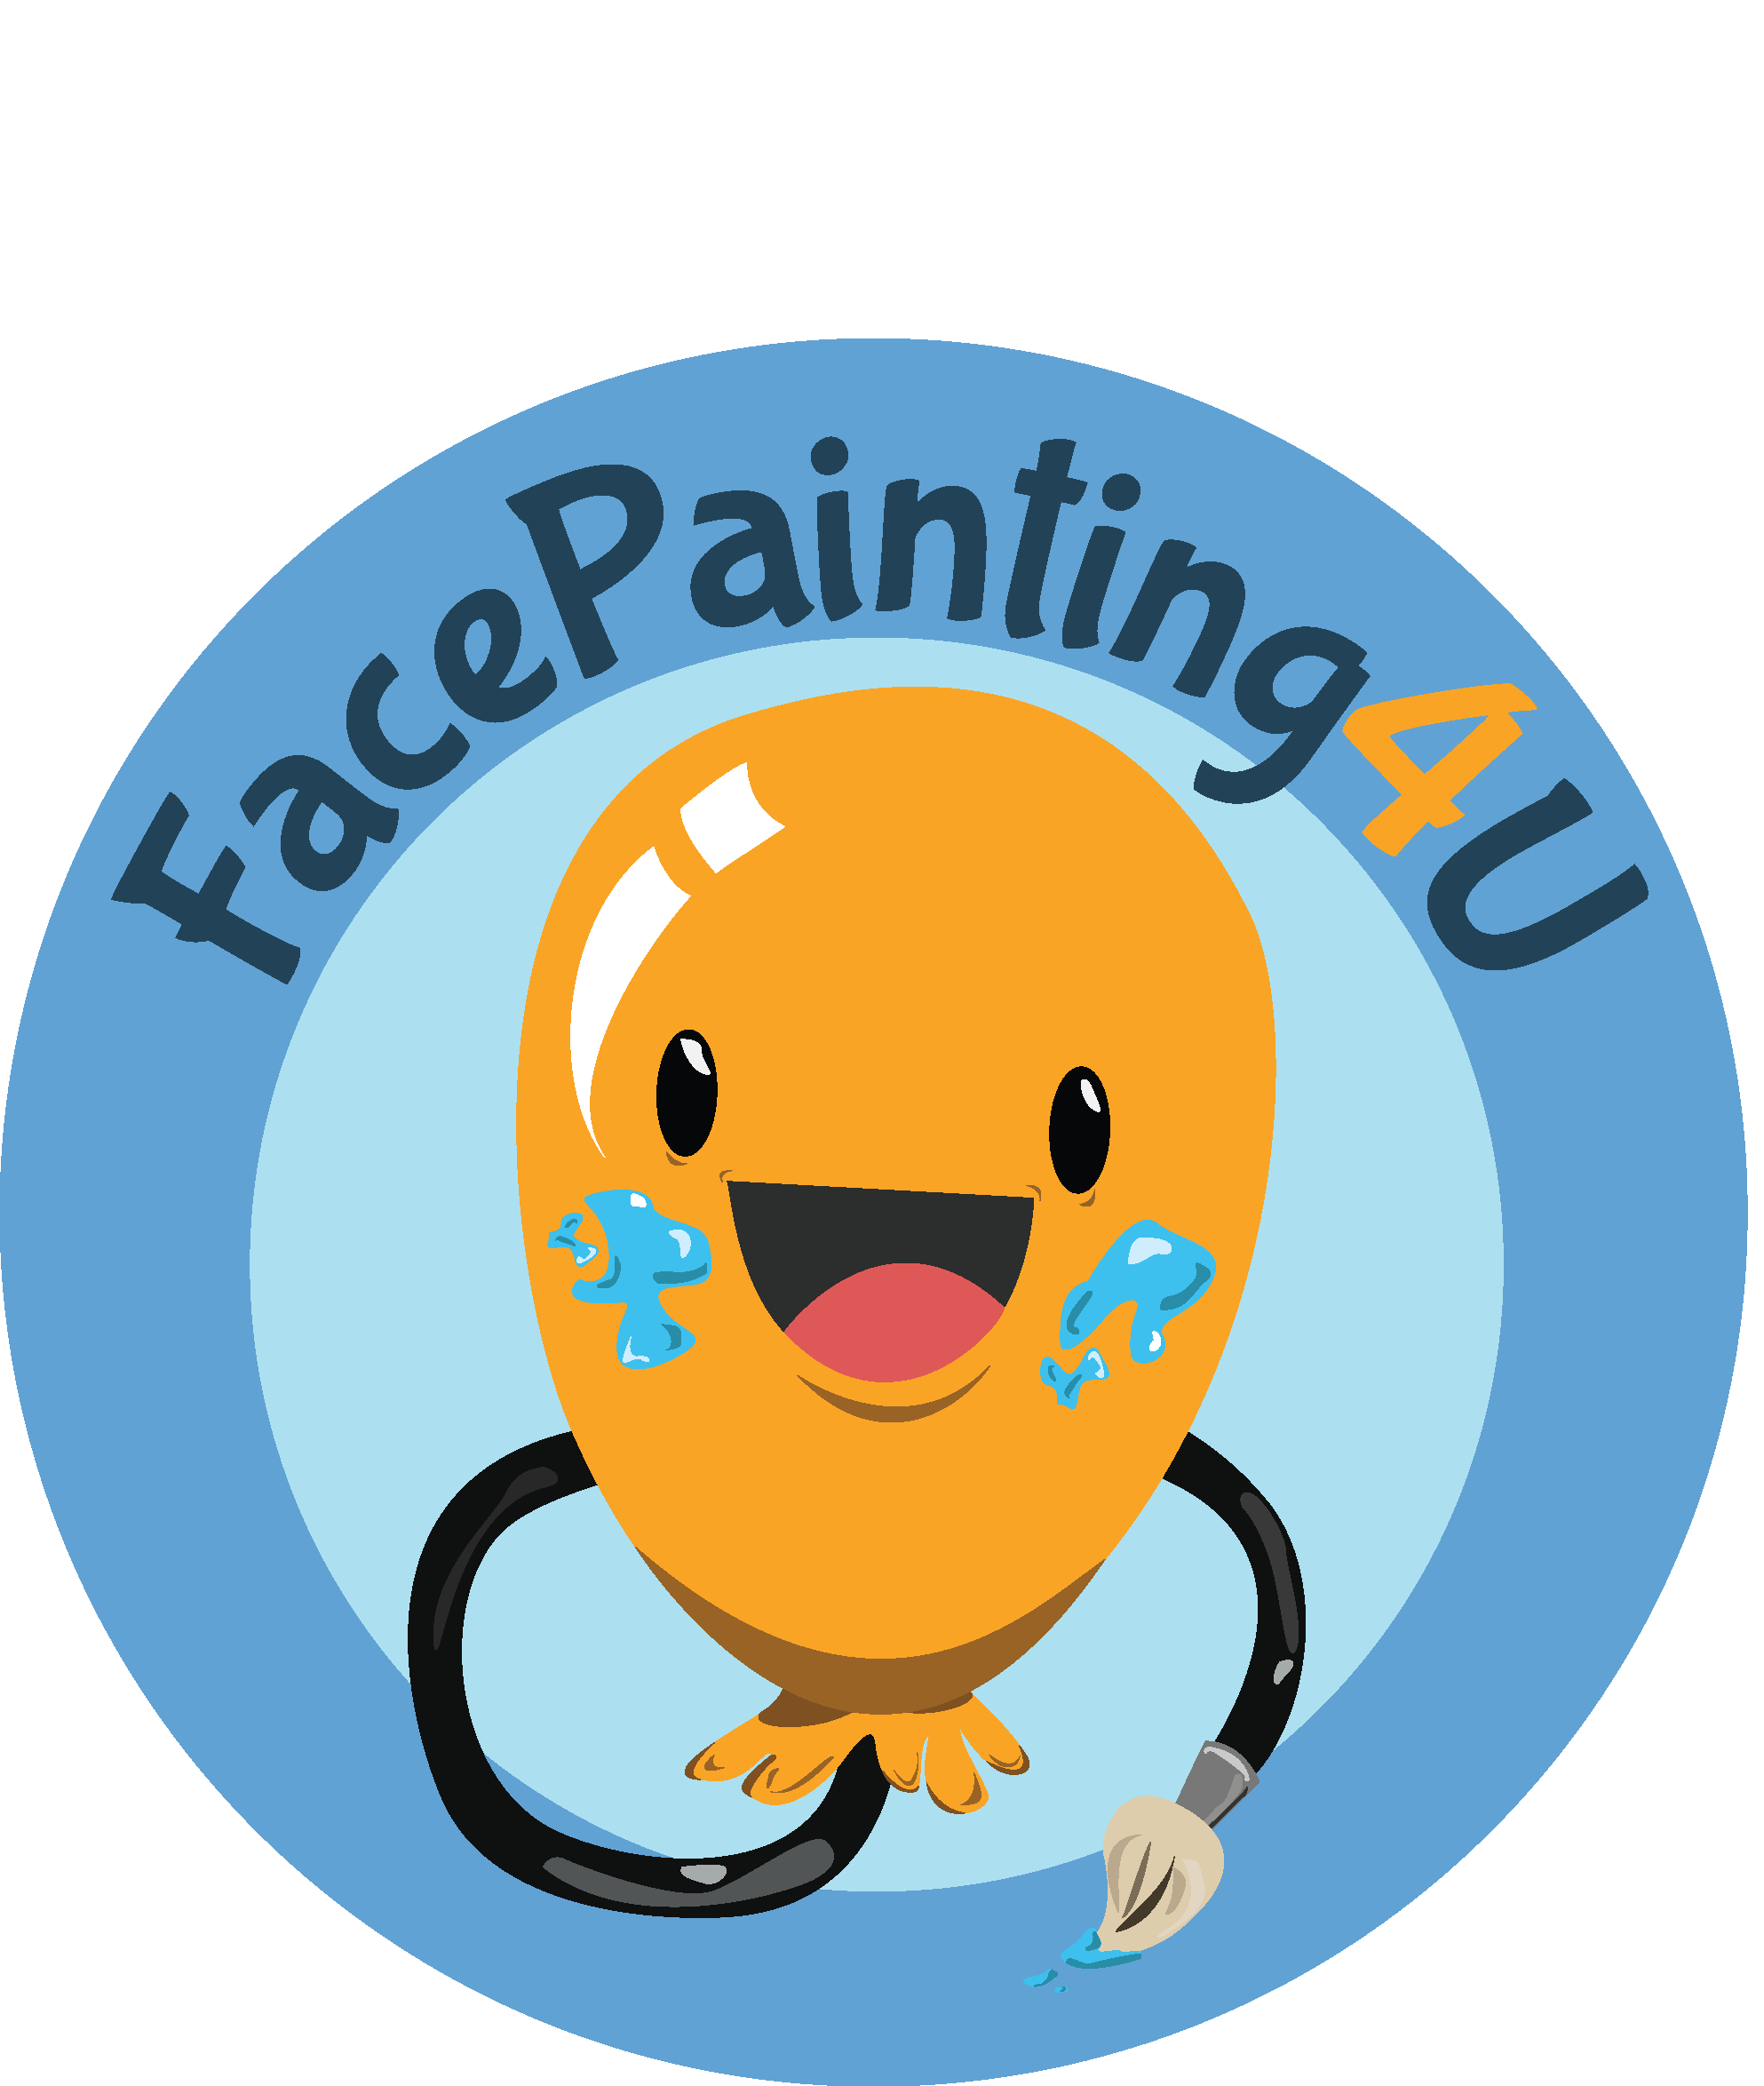 Face Painting Party or Baby Bump Painting - Women's Centre of York ...